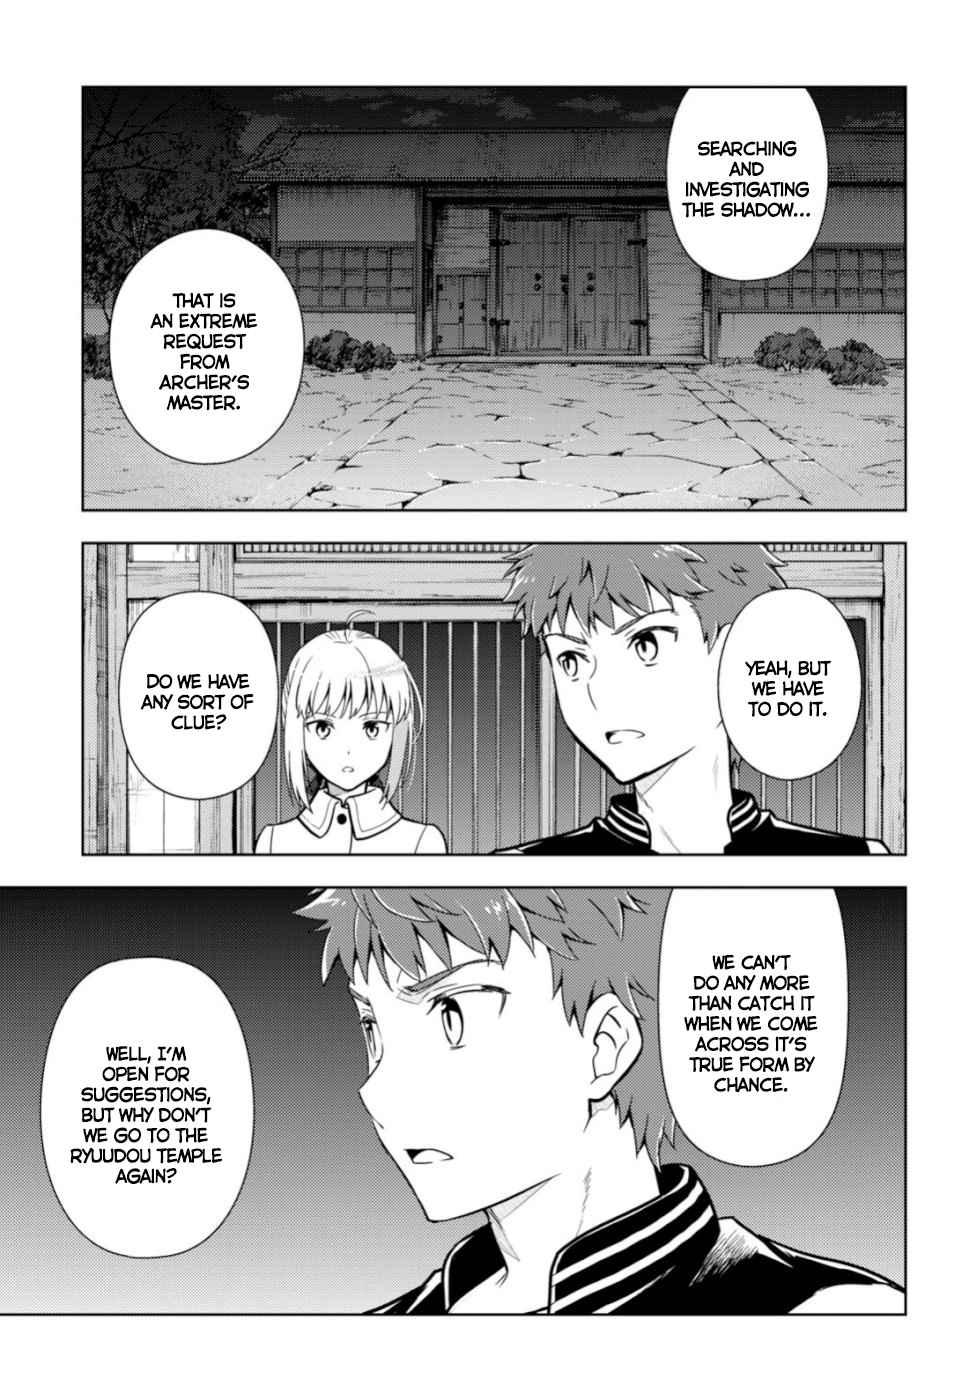 Fate/stay night: Heaven's Feel Vol. 8 Ch. 52 Day 8 / Truth (3)